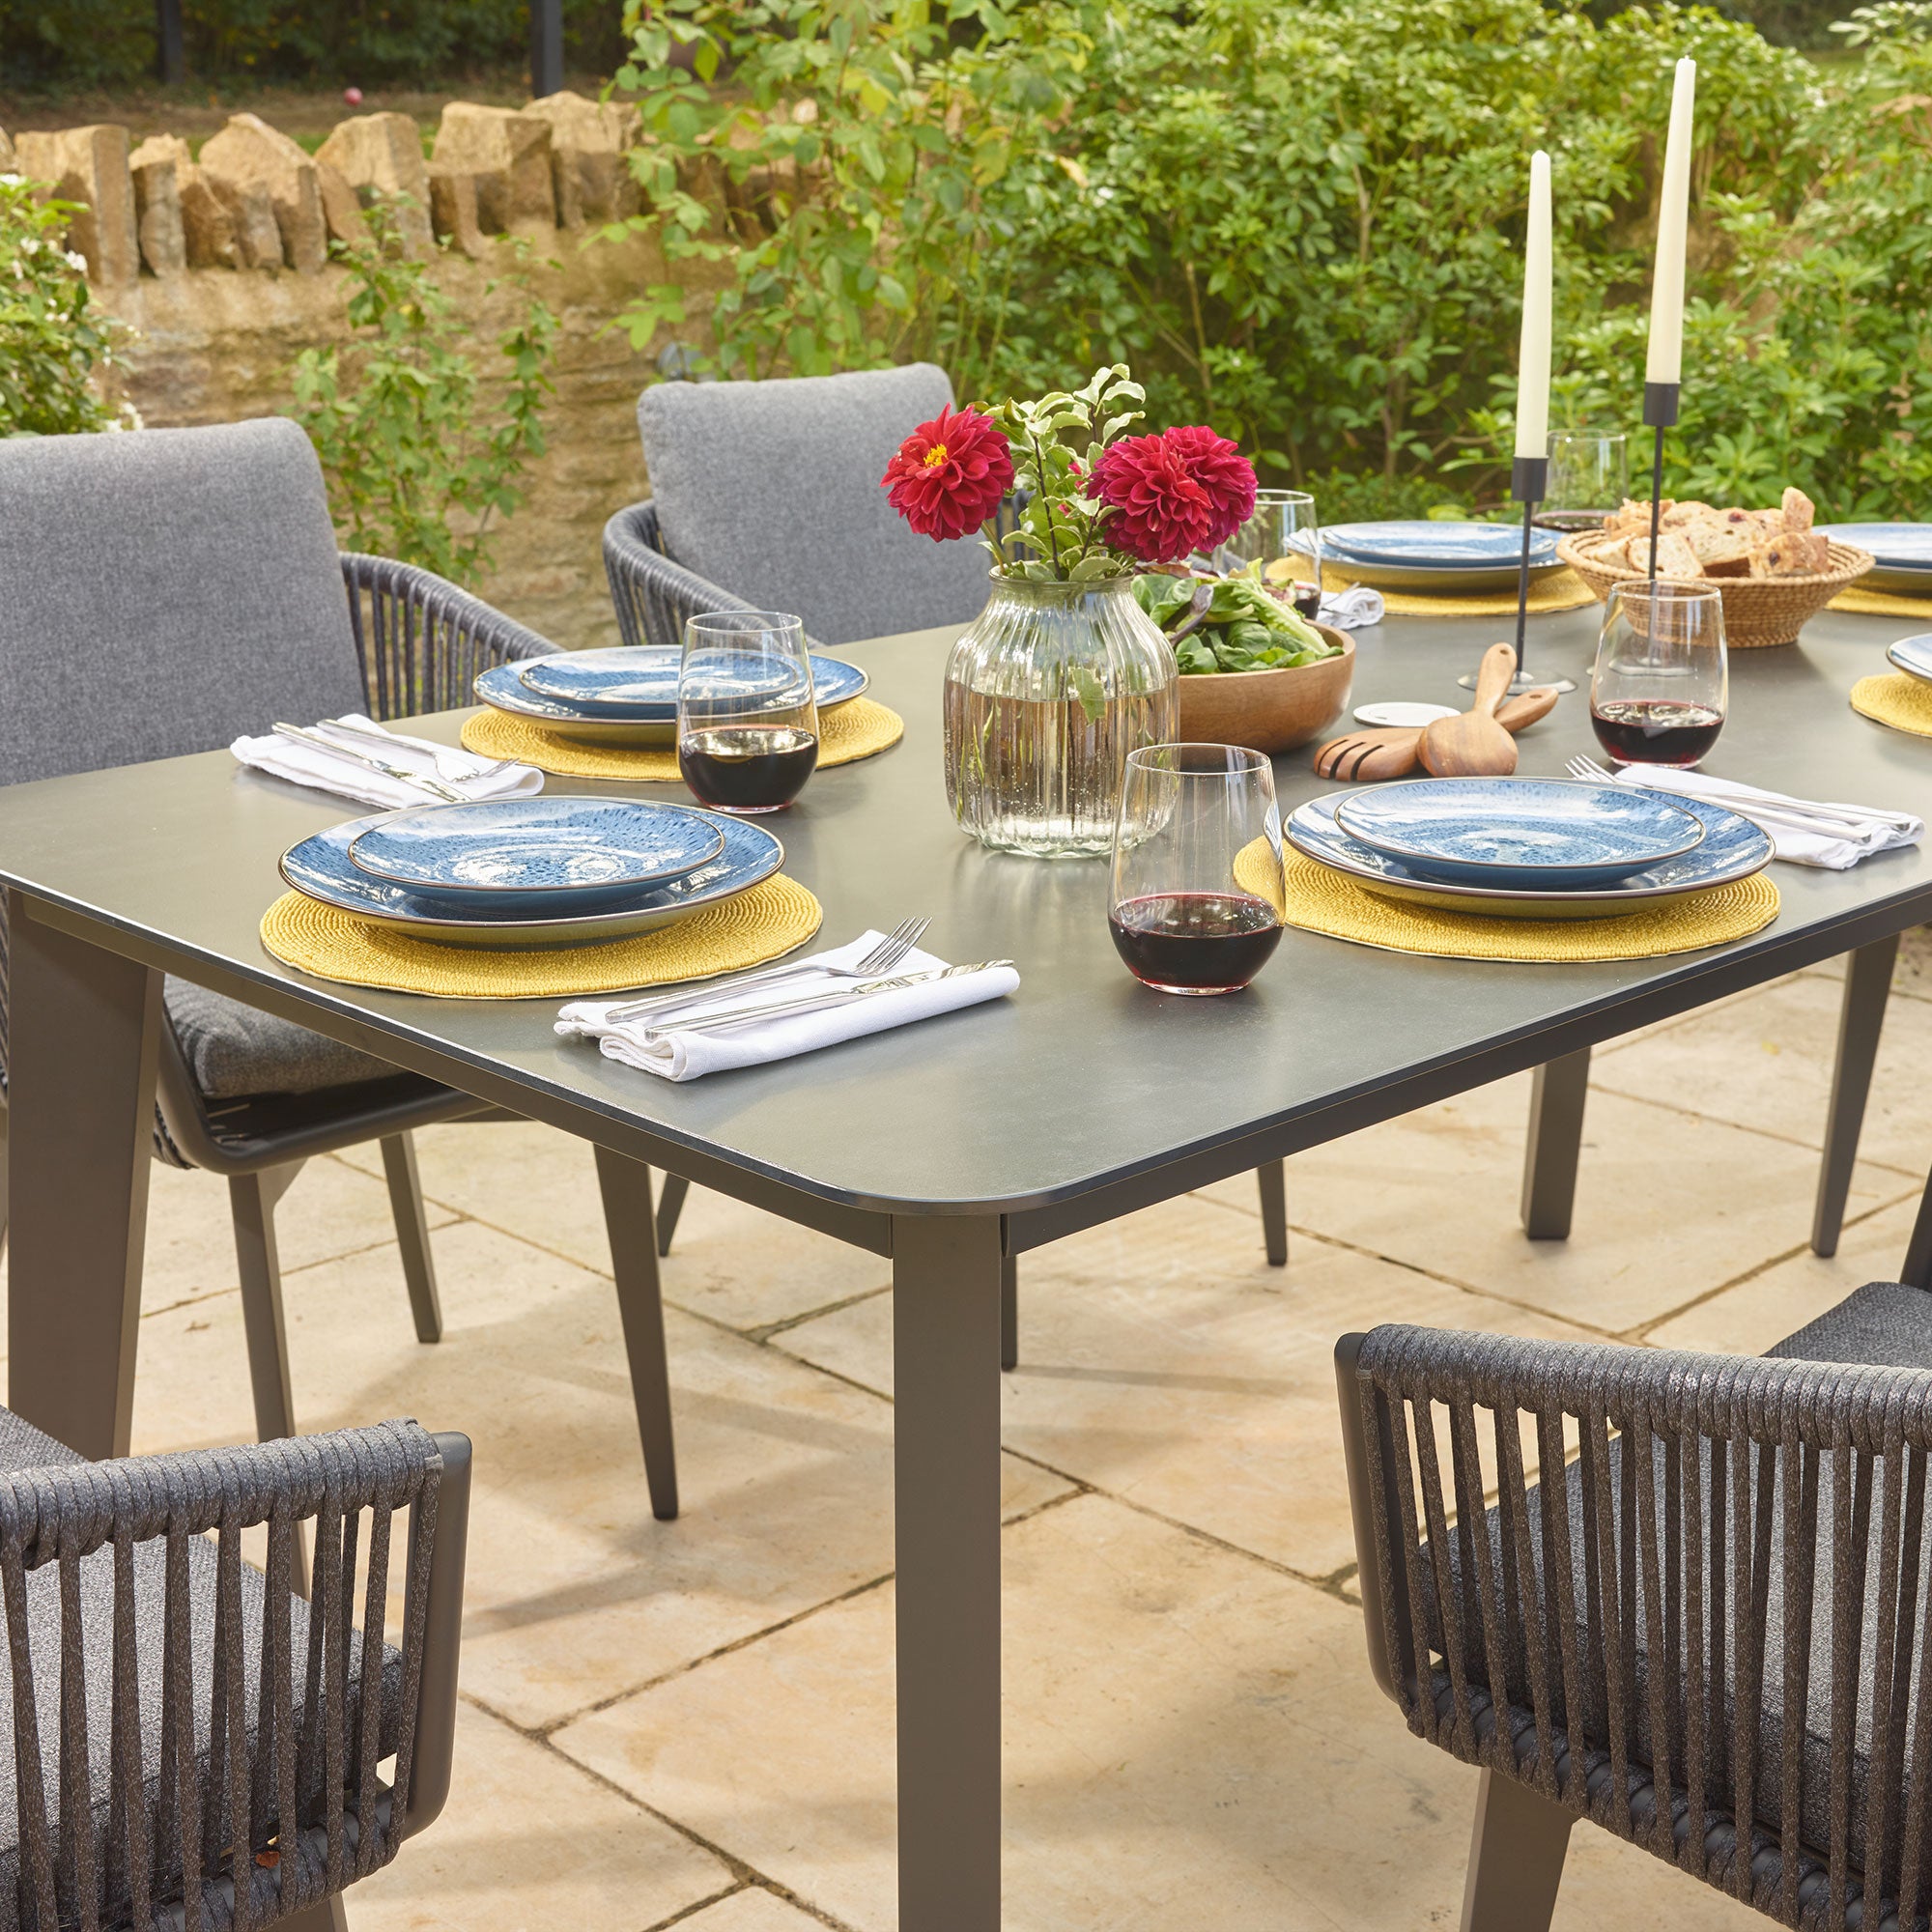 Rectangular 183 x 96cm Dining Table And 6 Chairs In Rope Effect Anthracite Including Parasol & Base